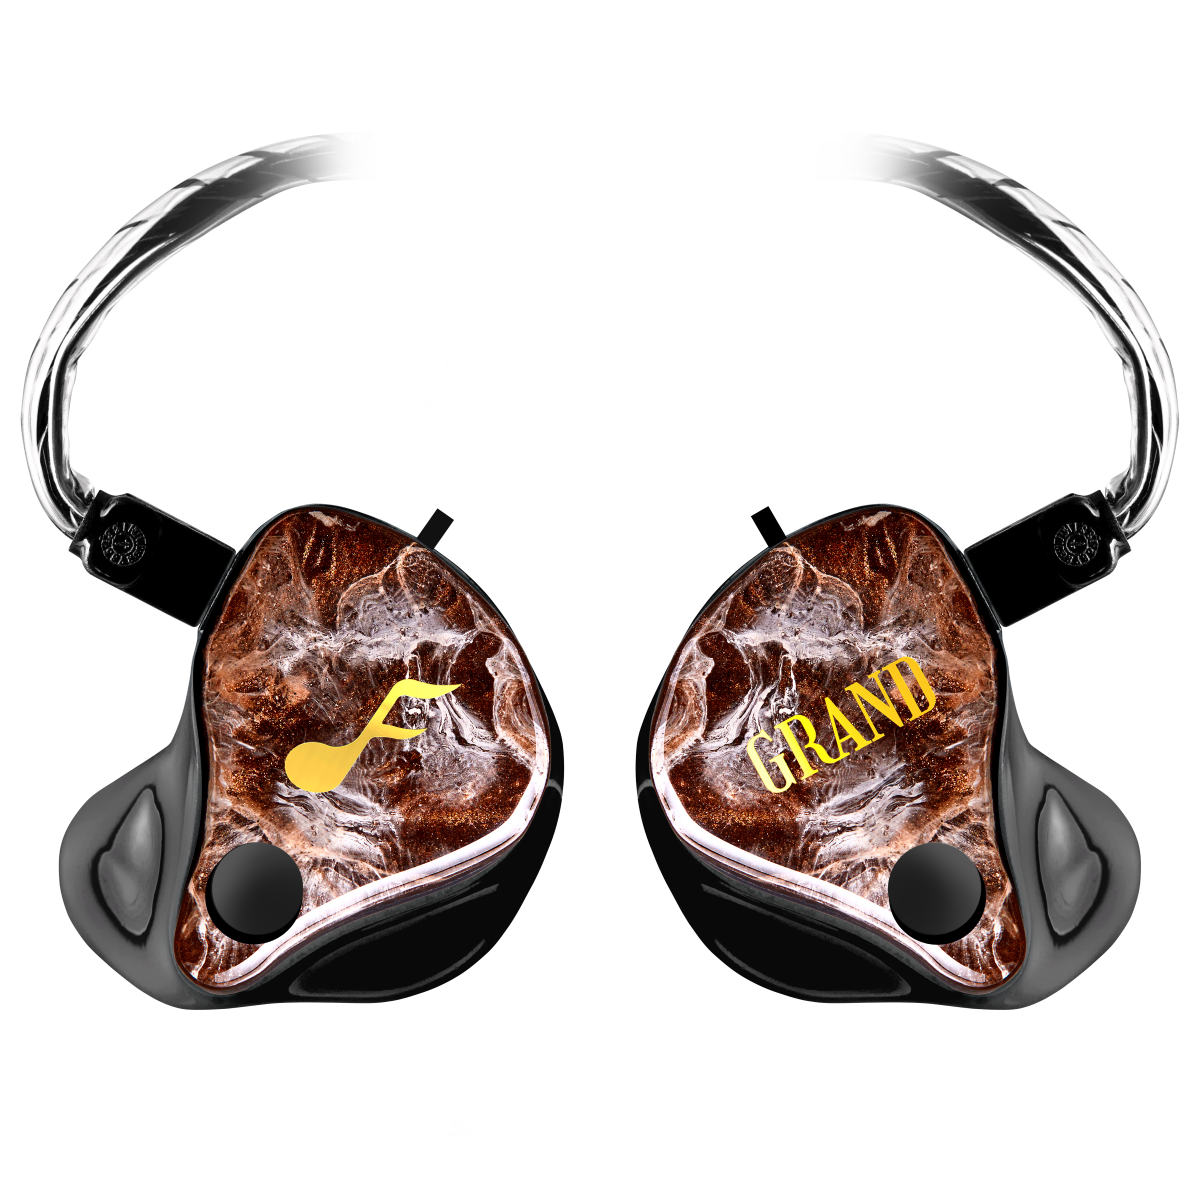 GRAND Maestro Custom IEM - Prices from 5106.00 to 5200.00